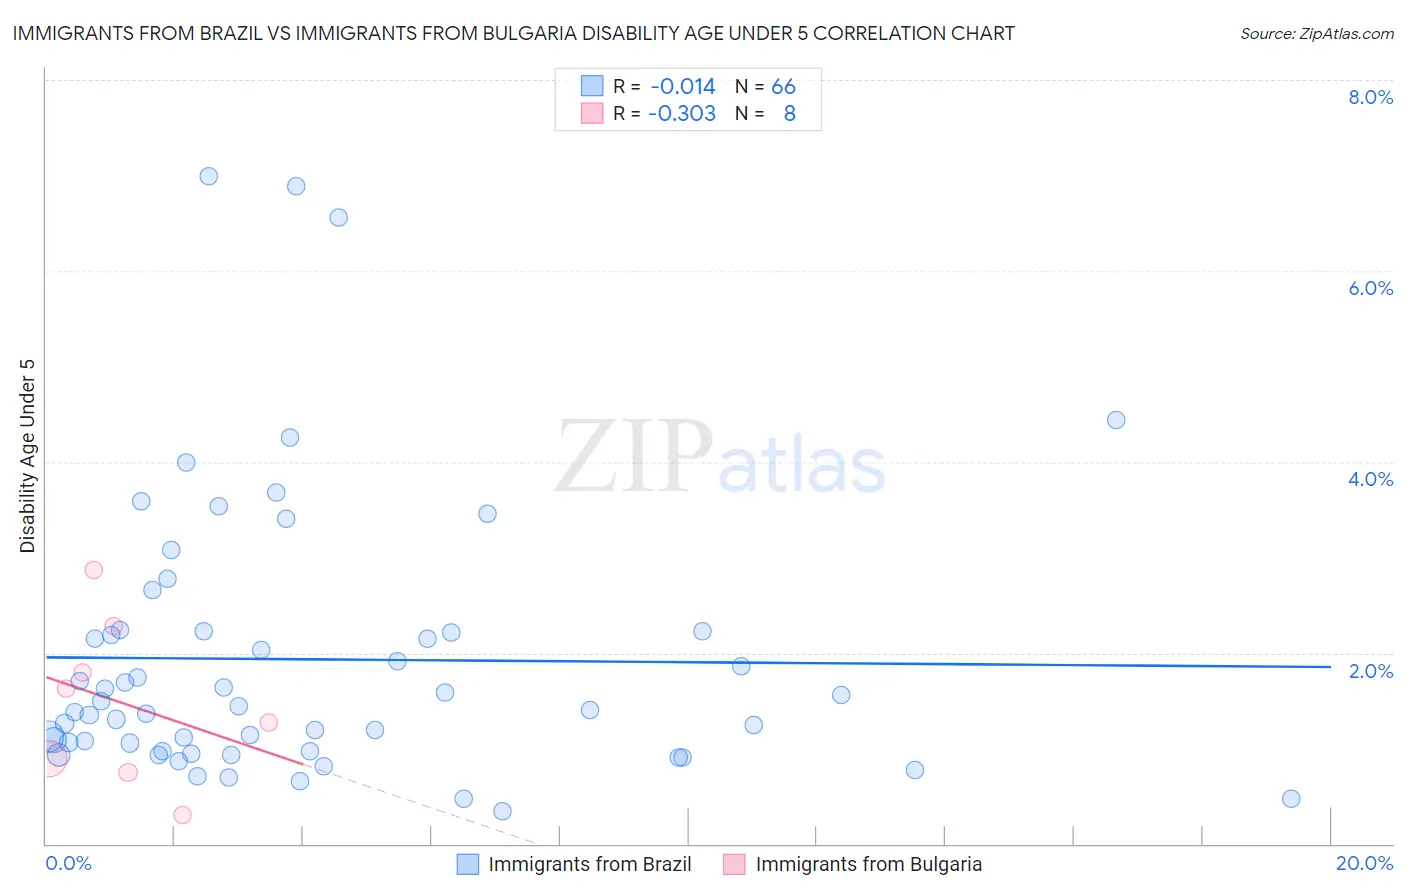 Immigrants from Brazil vs Immigrants from Bulgaria Disability Age Under 5